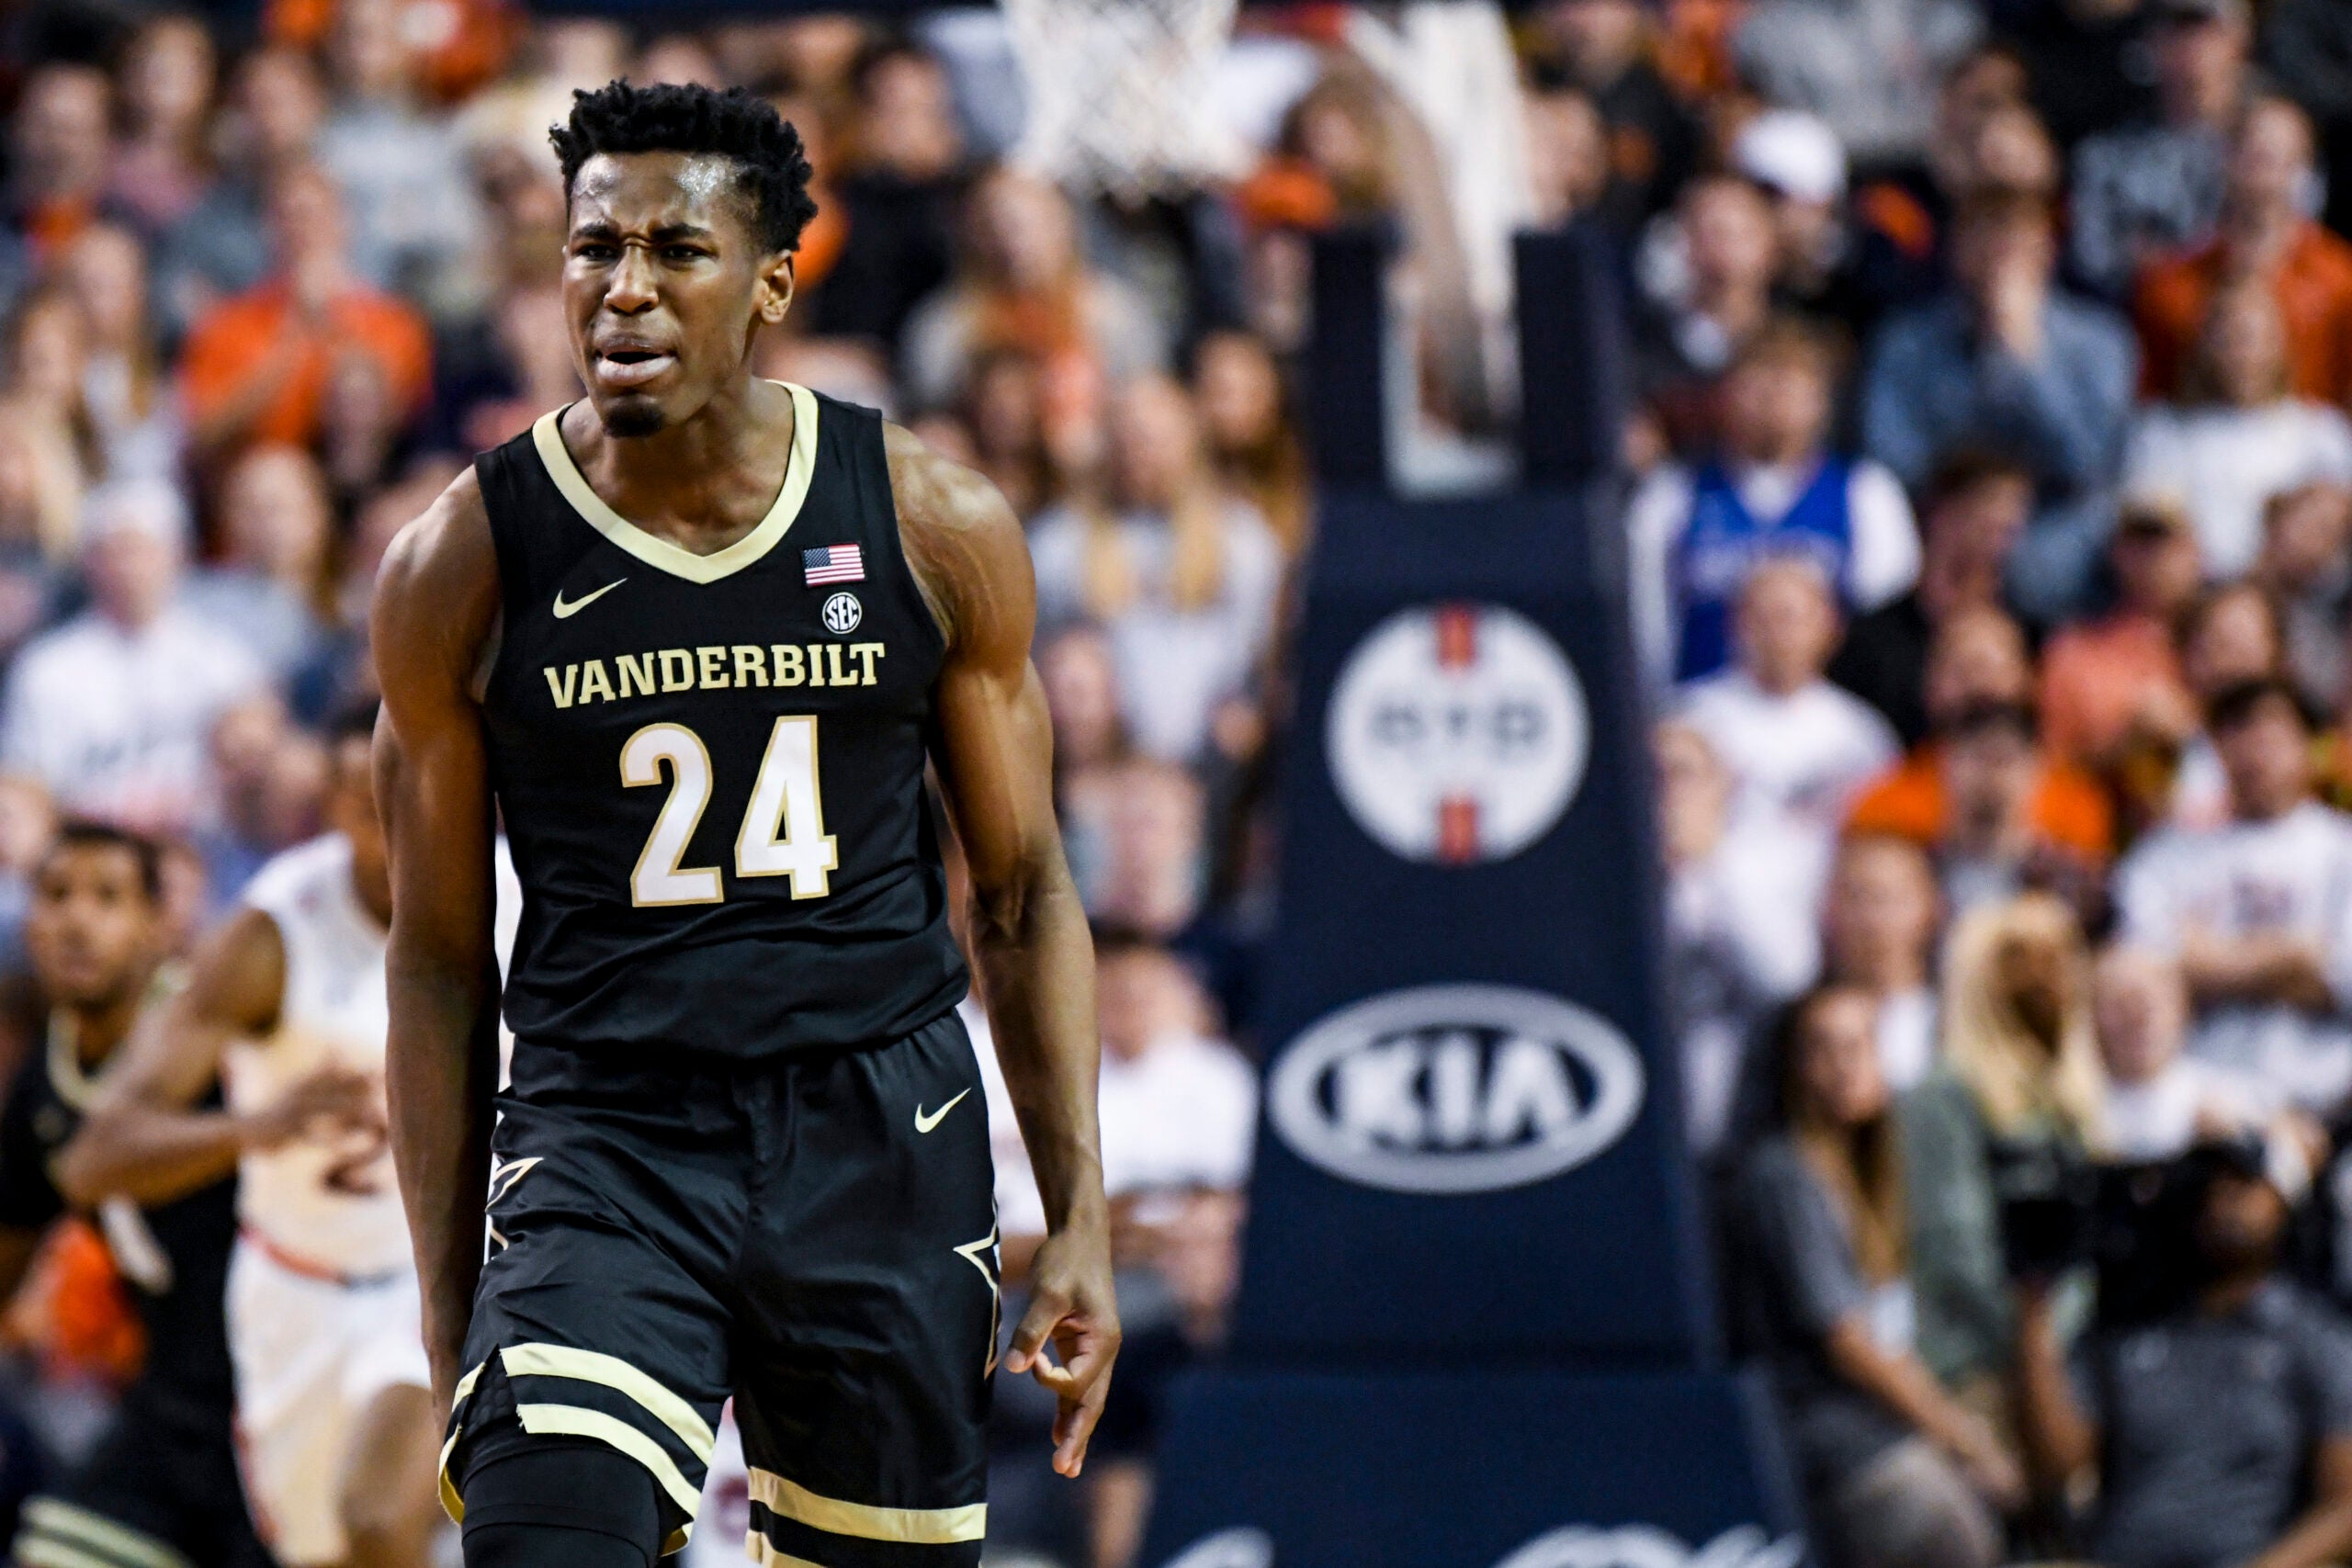 NBA Draft 2020: Top 3 options for the Boston Celtics with the No. 14 pick